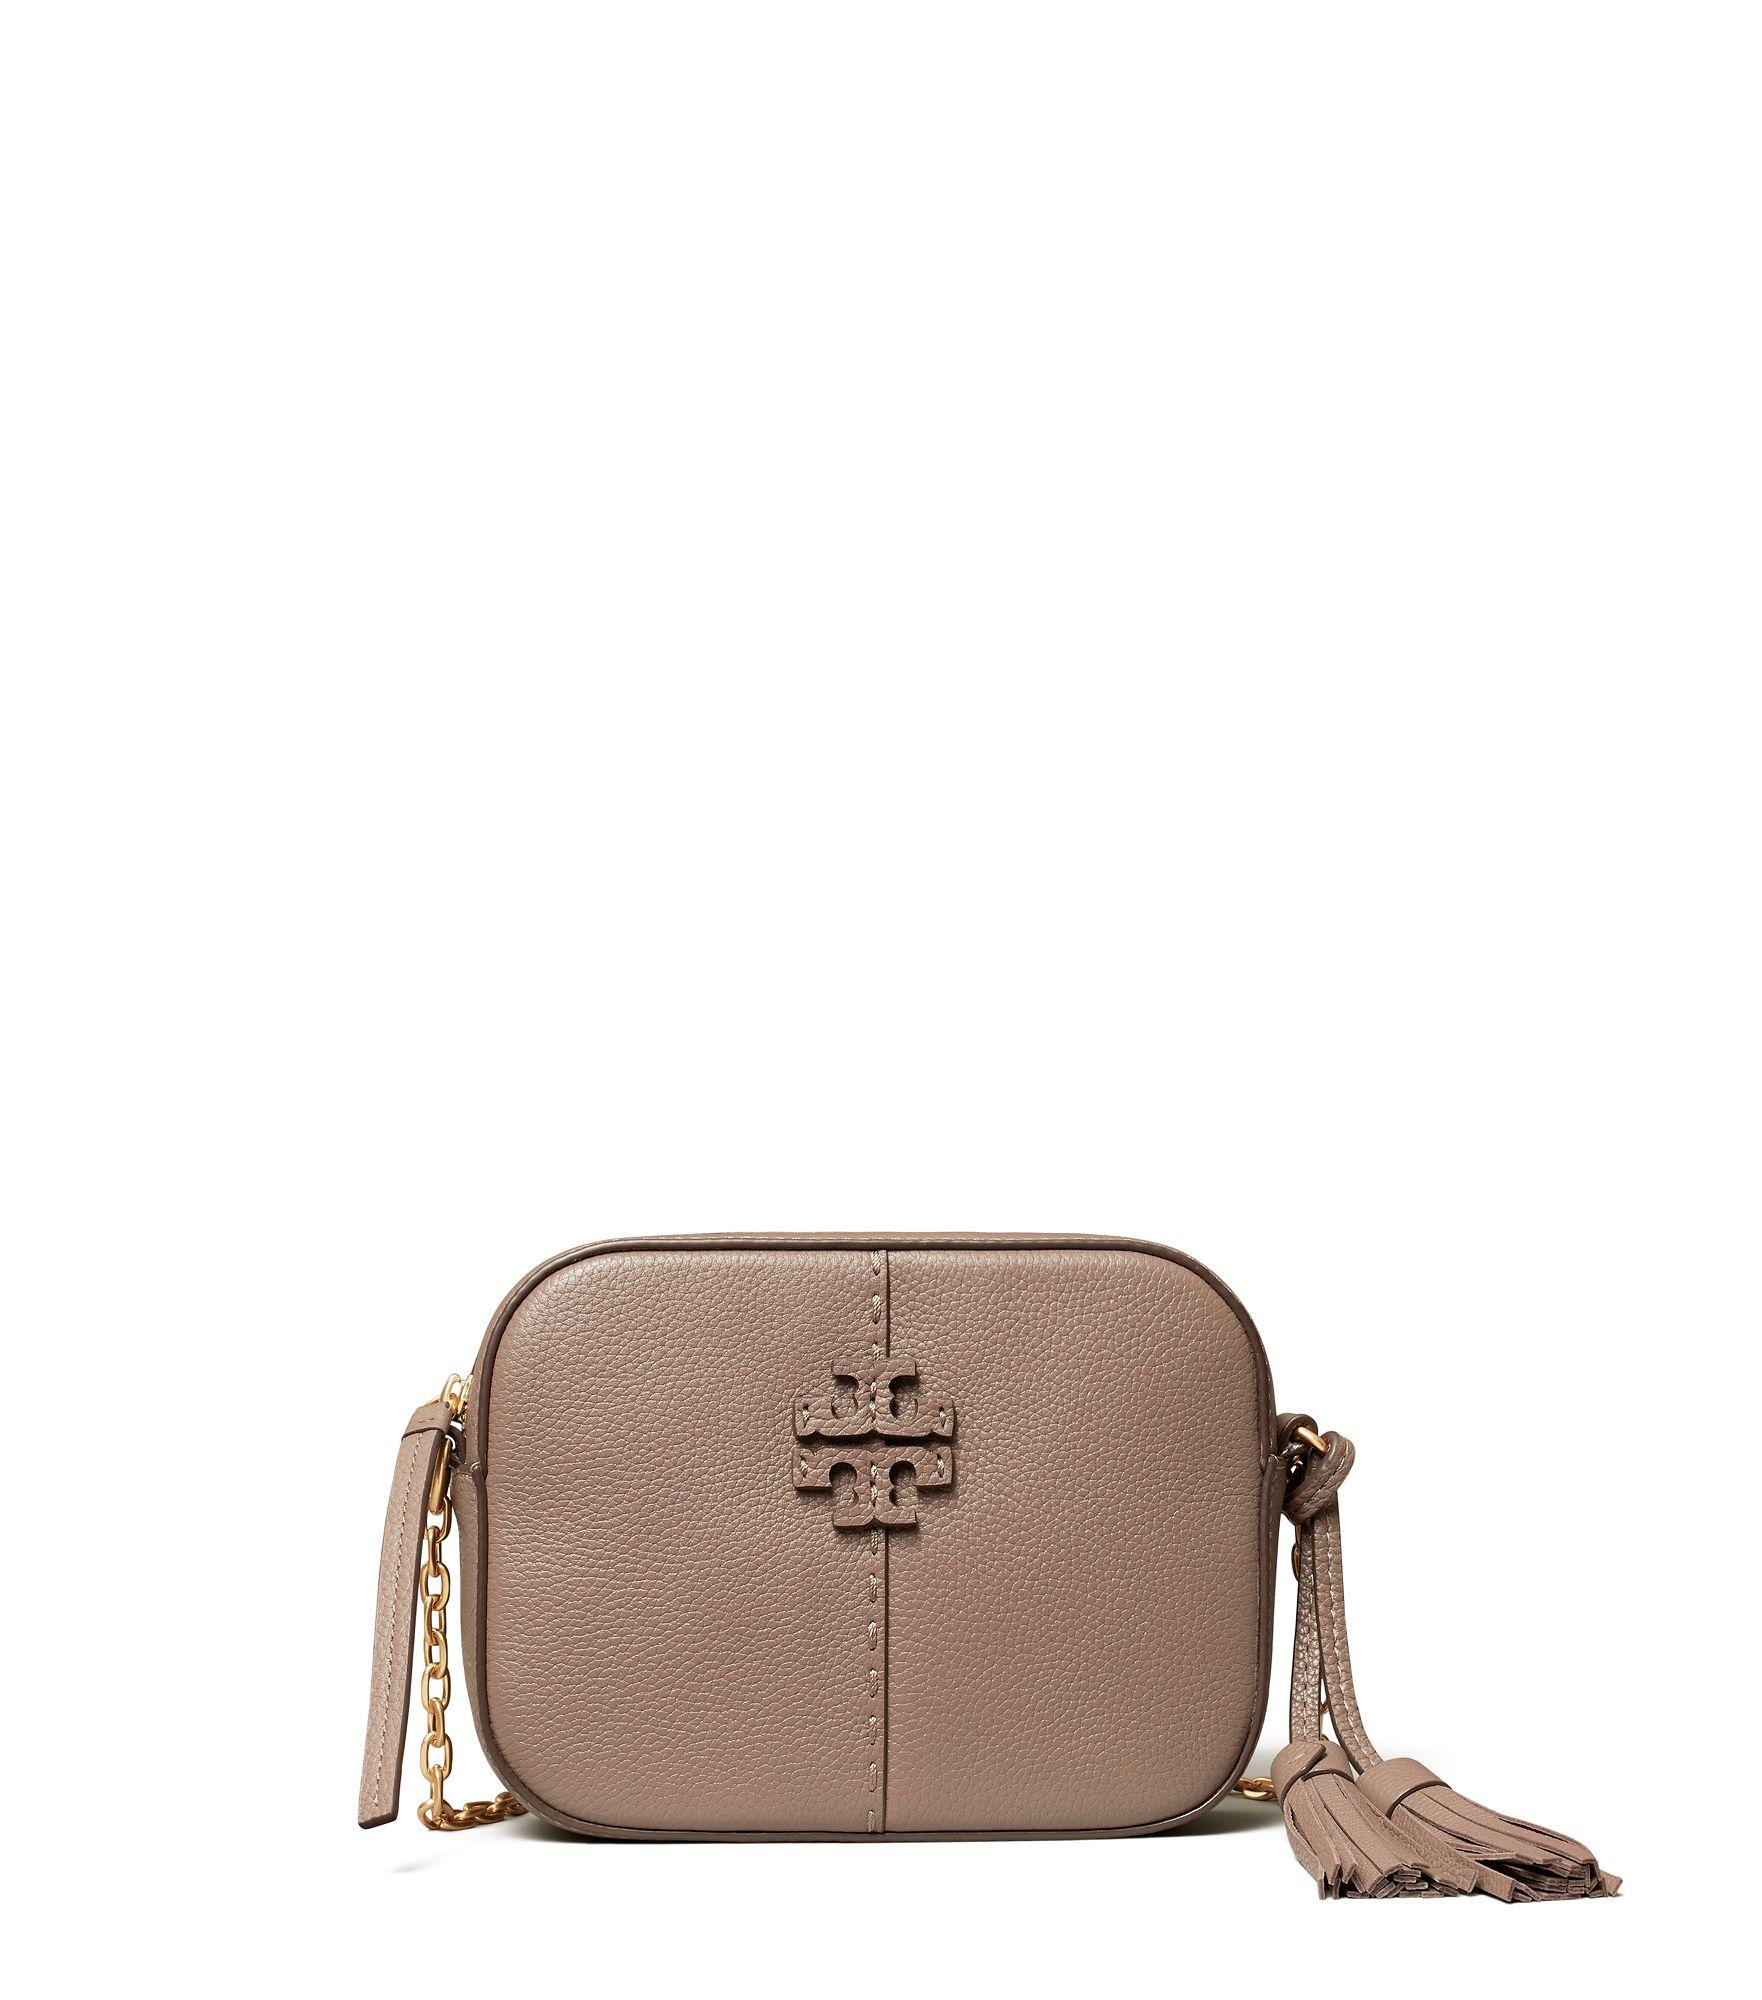 Tory Burch Leather 'mcgraw' Shoulder Bag Grey in Gray - Save 27% - Lyst